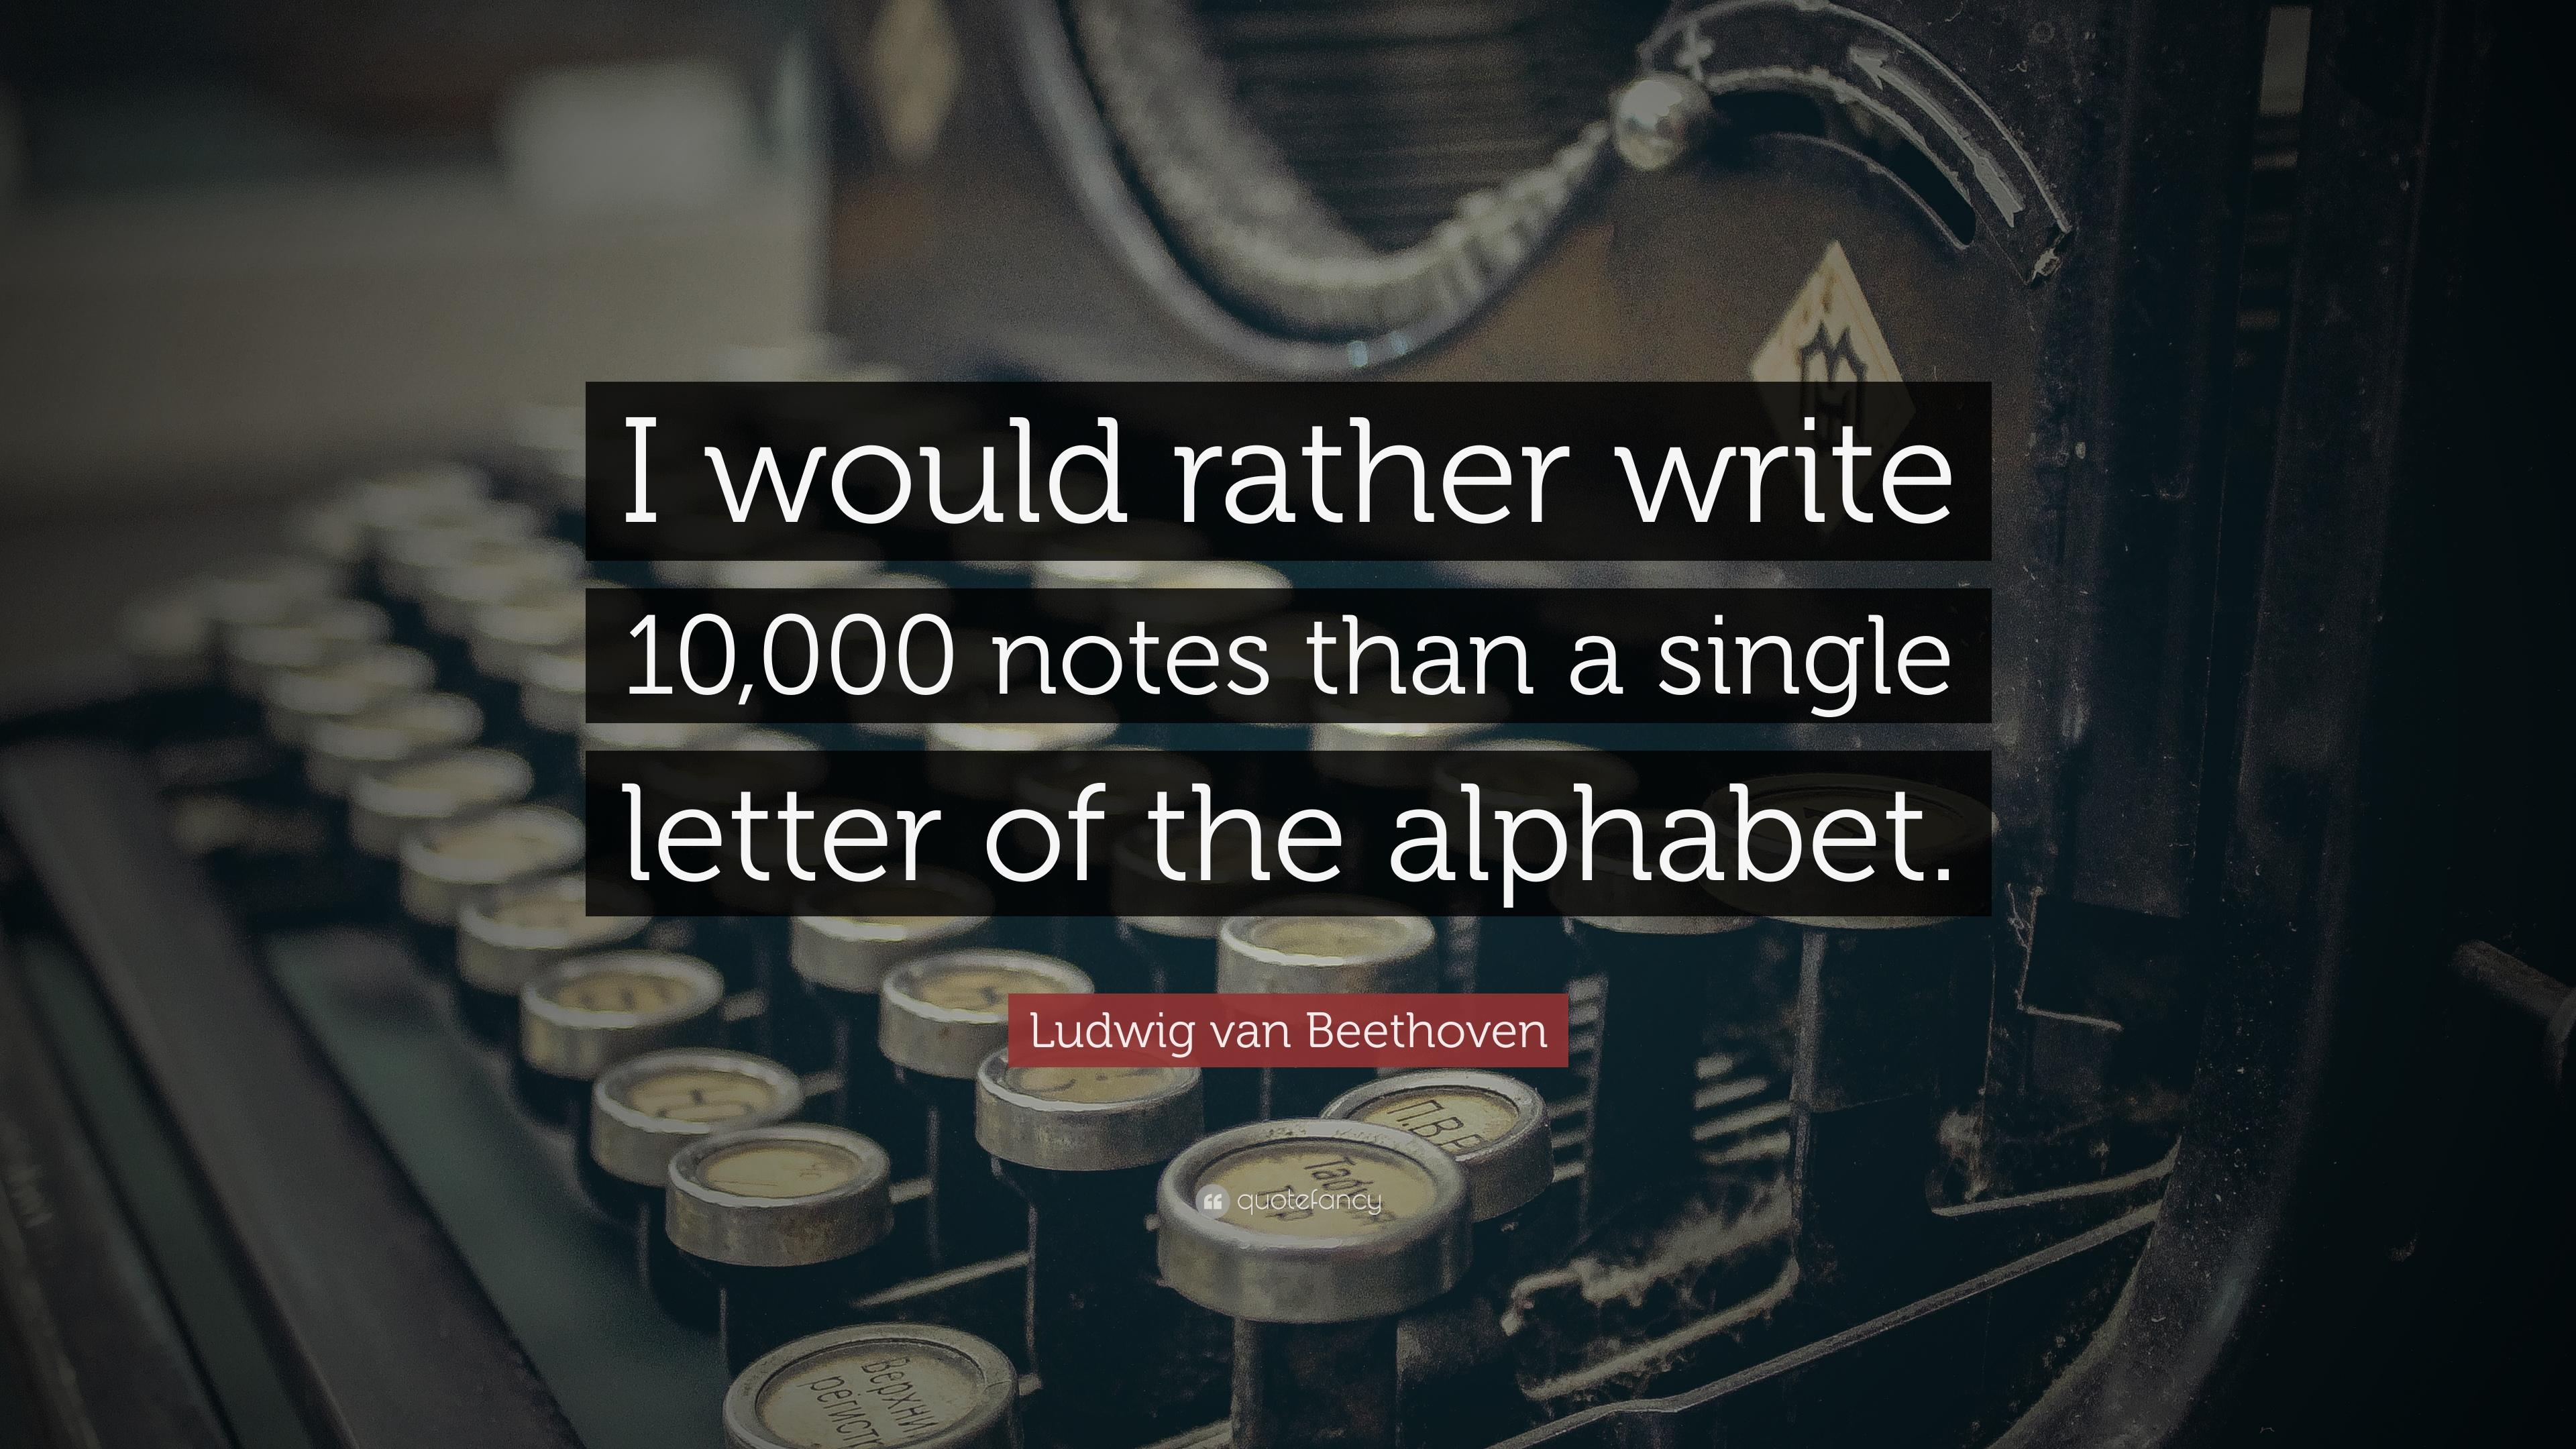 Ludwig van Beethoven Quote: “I would rather write 000 notes than